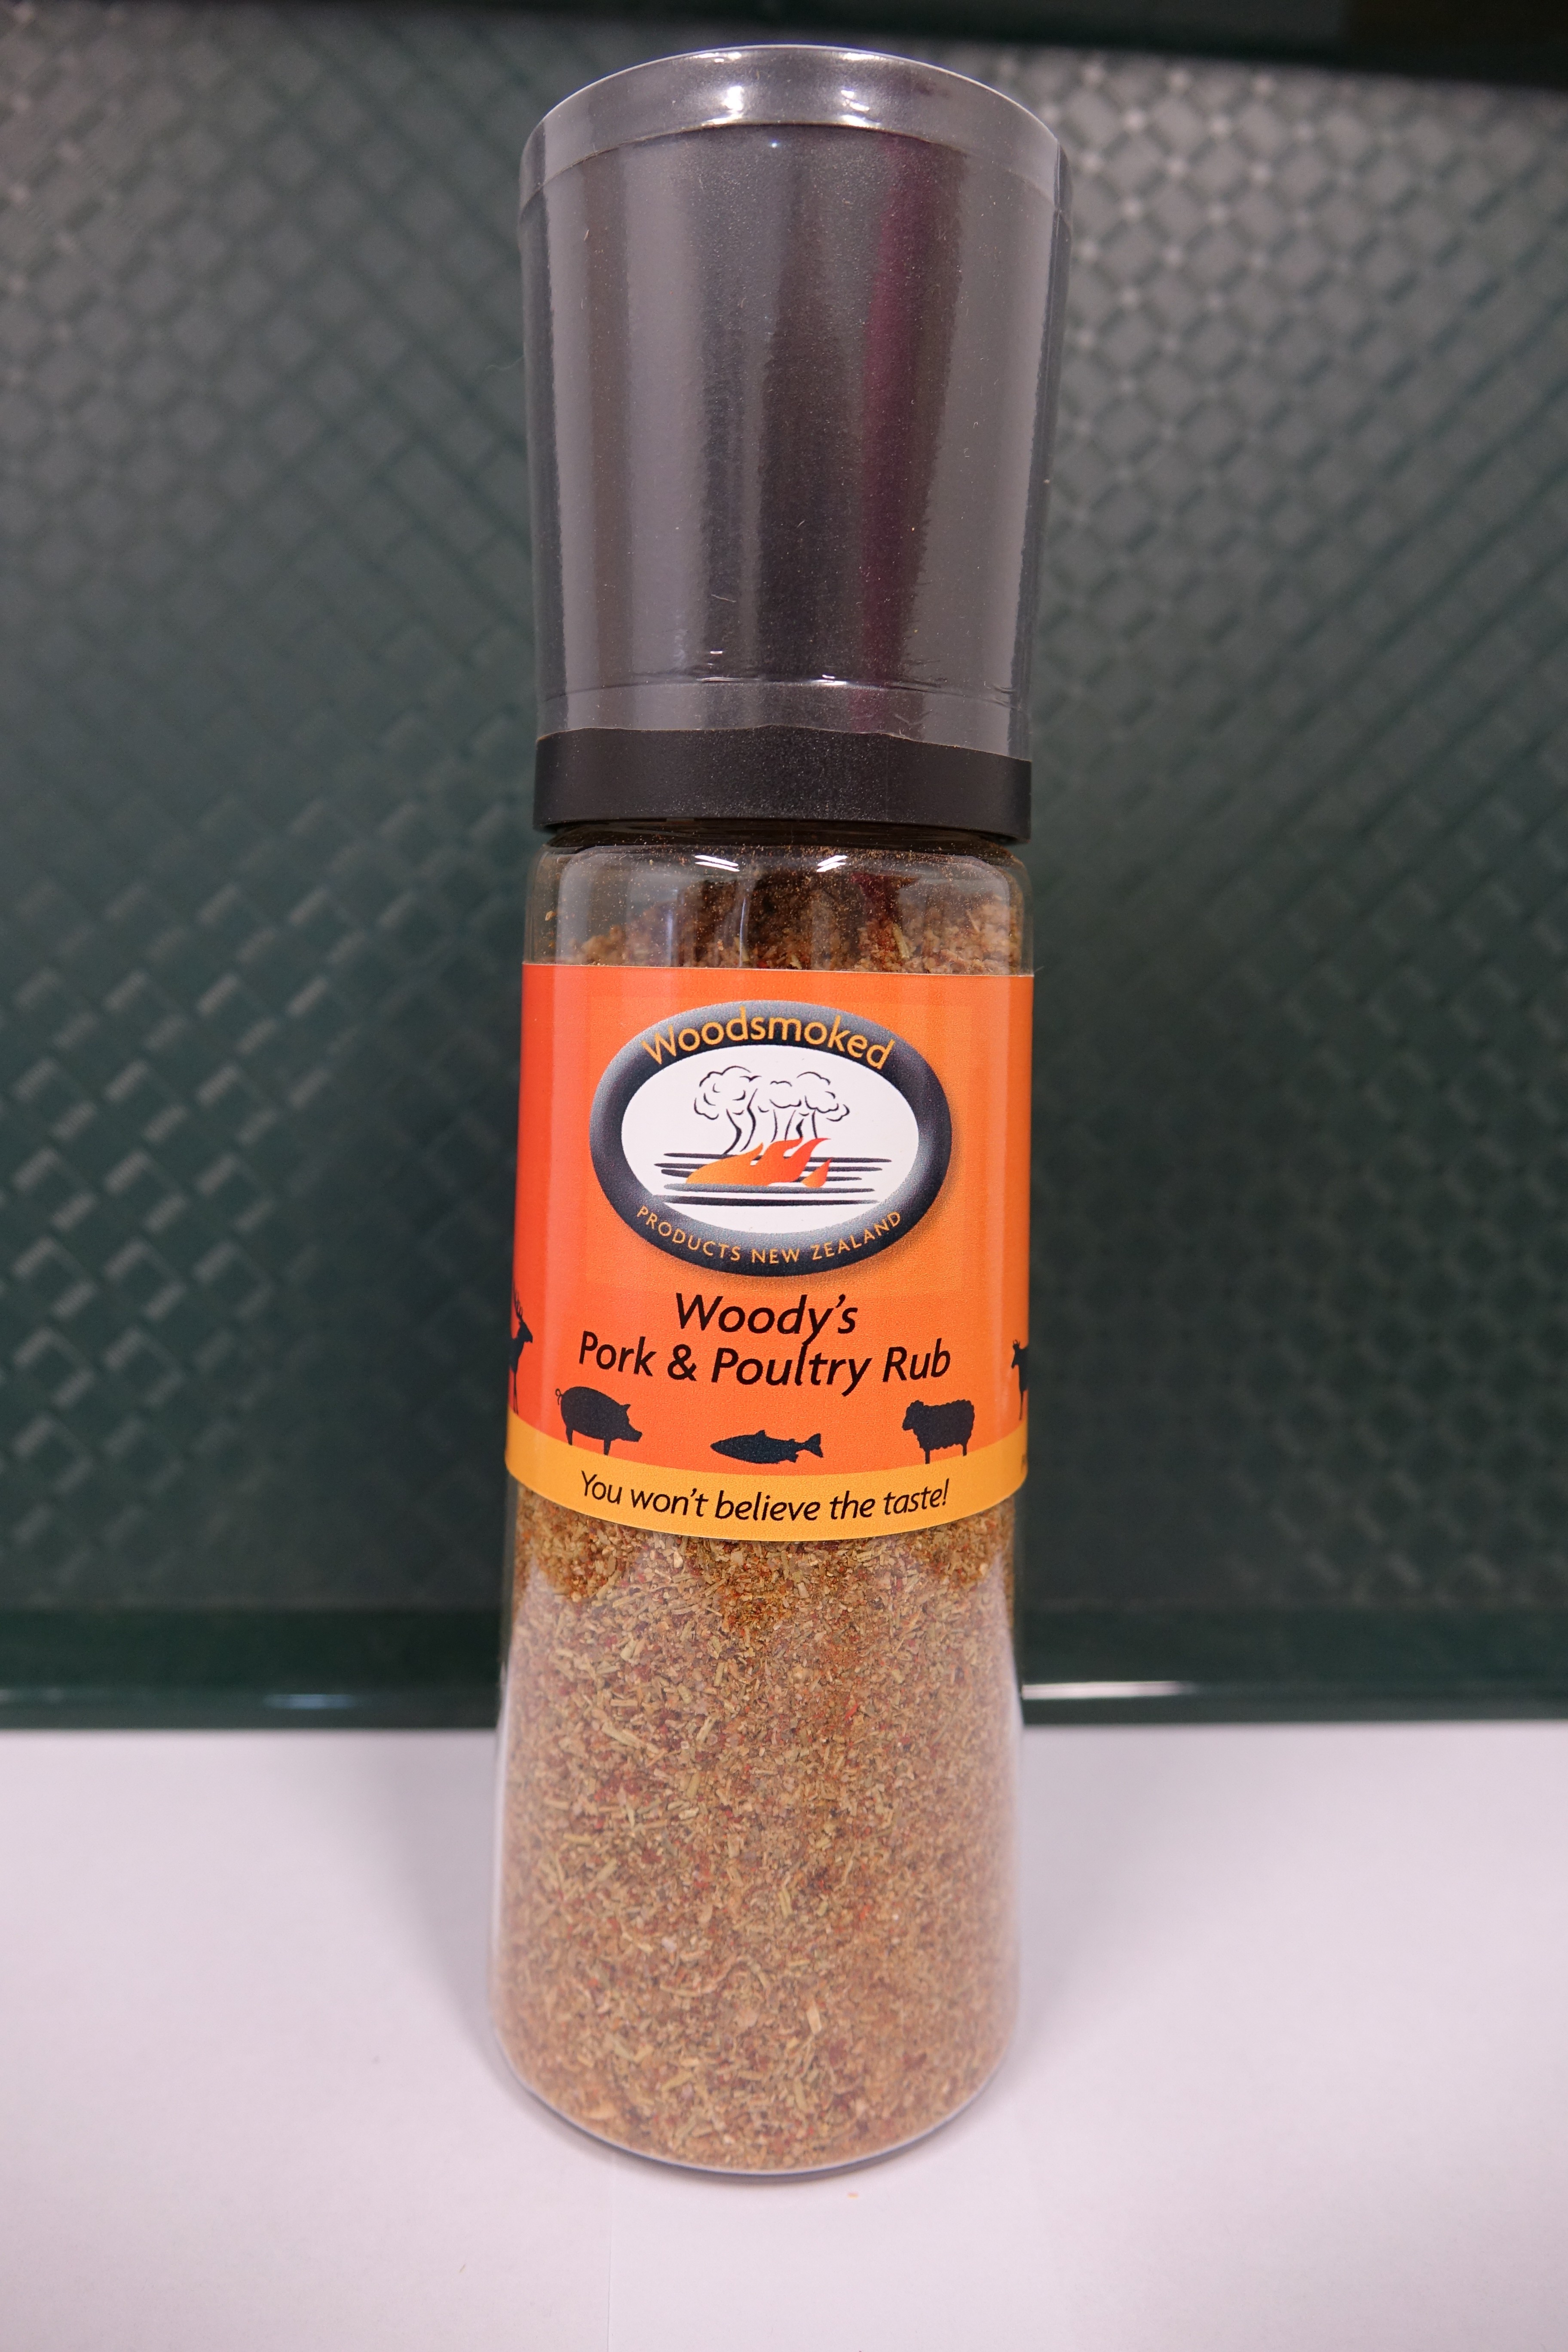  Woody's Smokey Maple Pork & Poultry Rub (with an adjustable disposable grinder) 200 grams